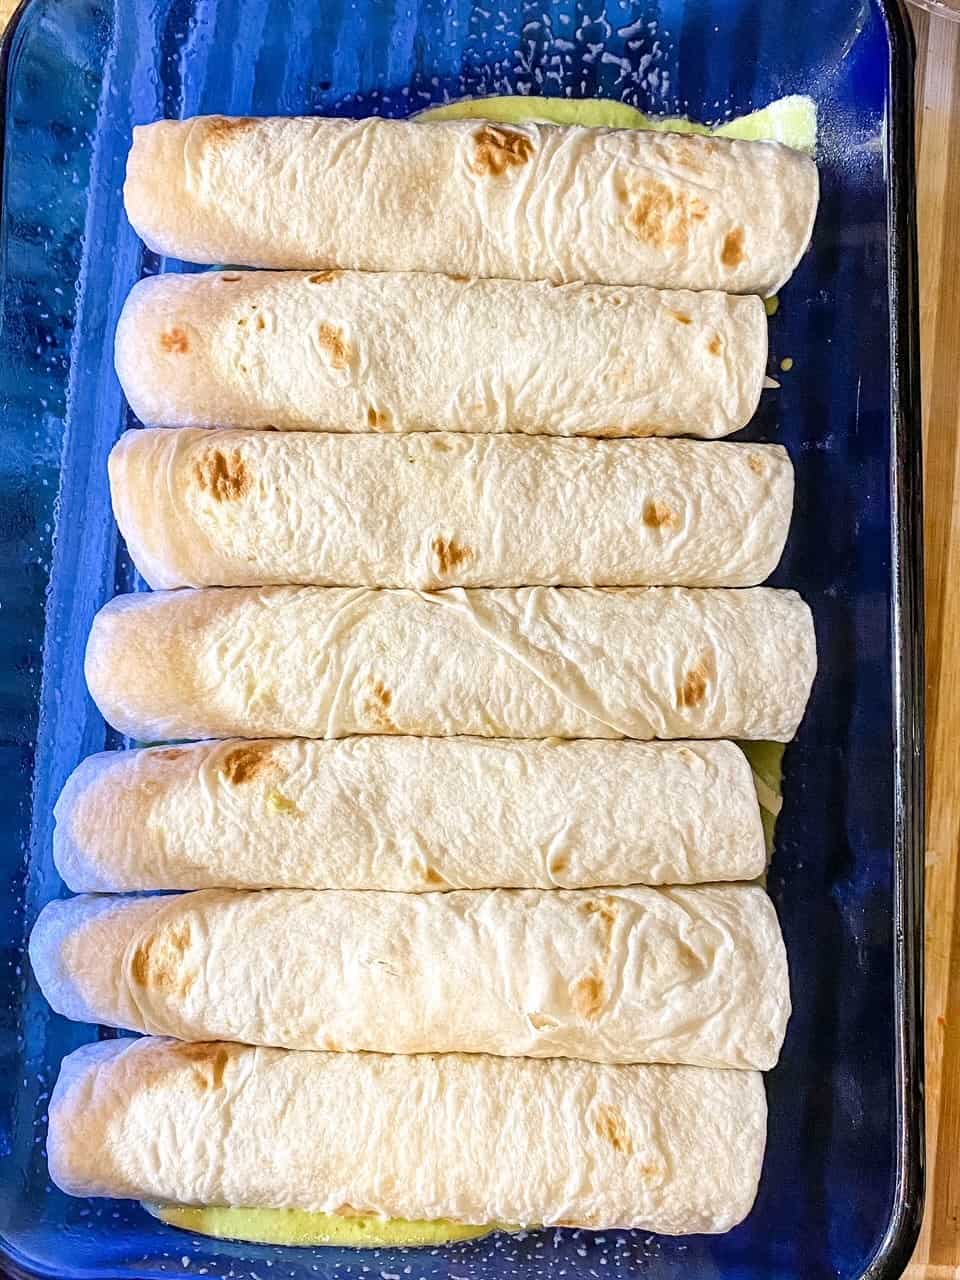 shrimp enchiladas rolled in tortillas placed in a baking dish